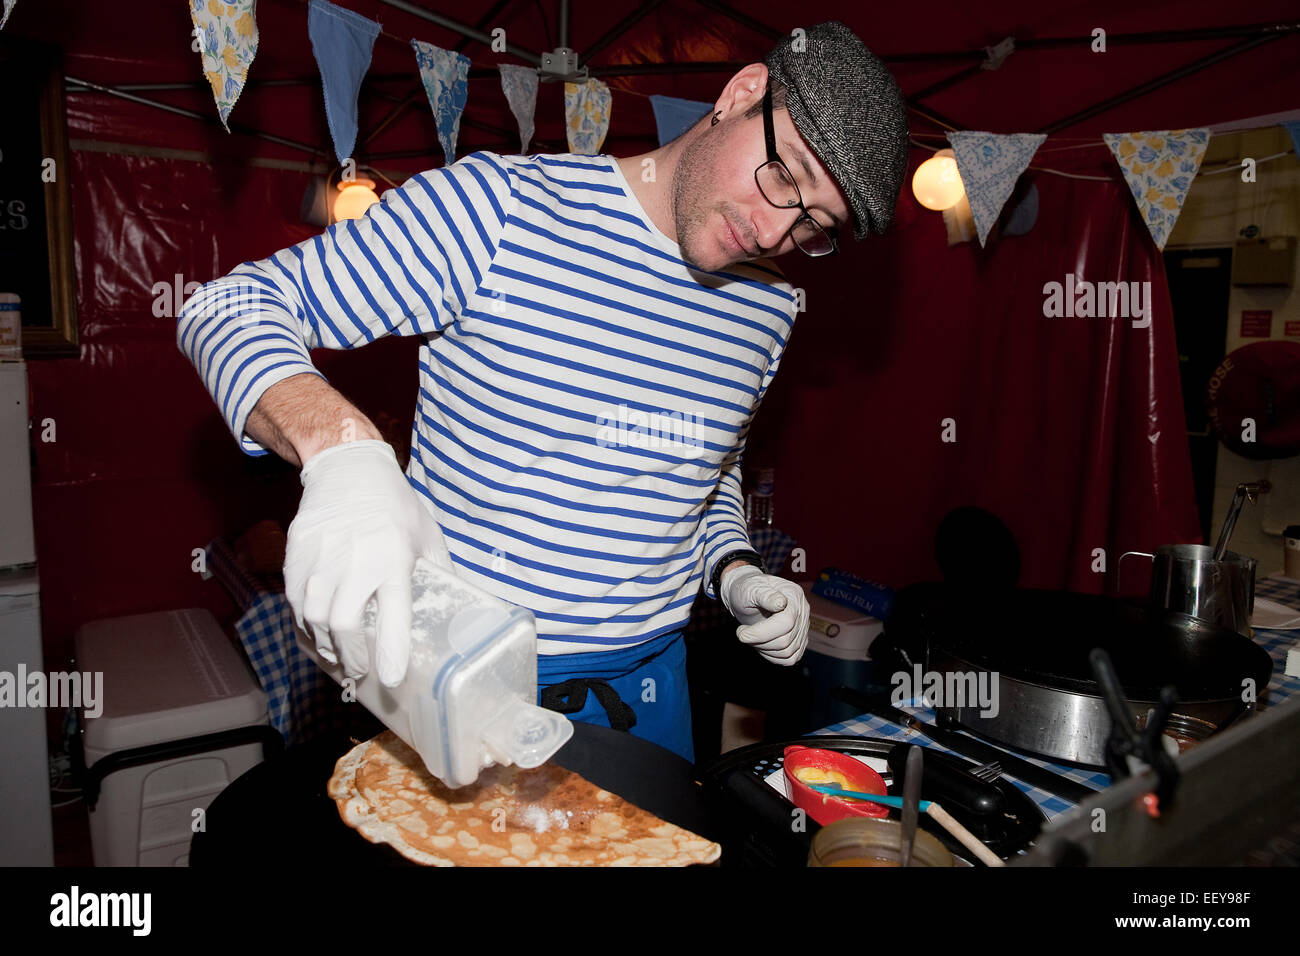 Sugar is added to French crepes at the France Show 2015 in Olympia London Stock Photo